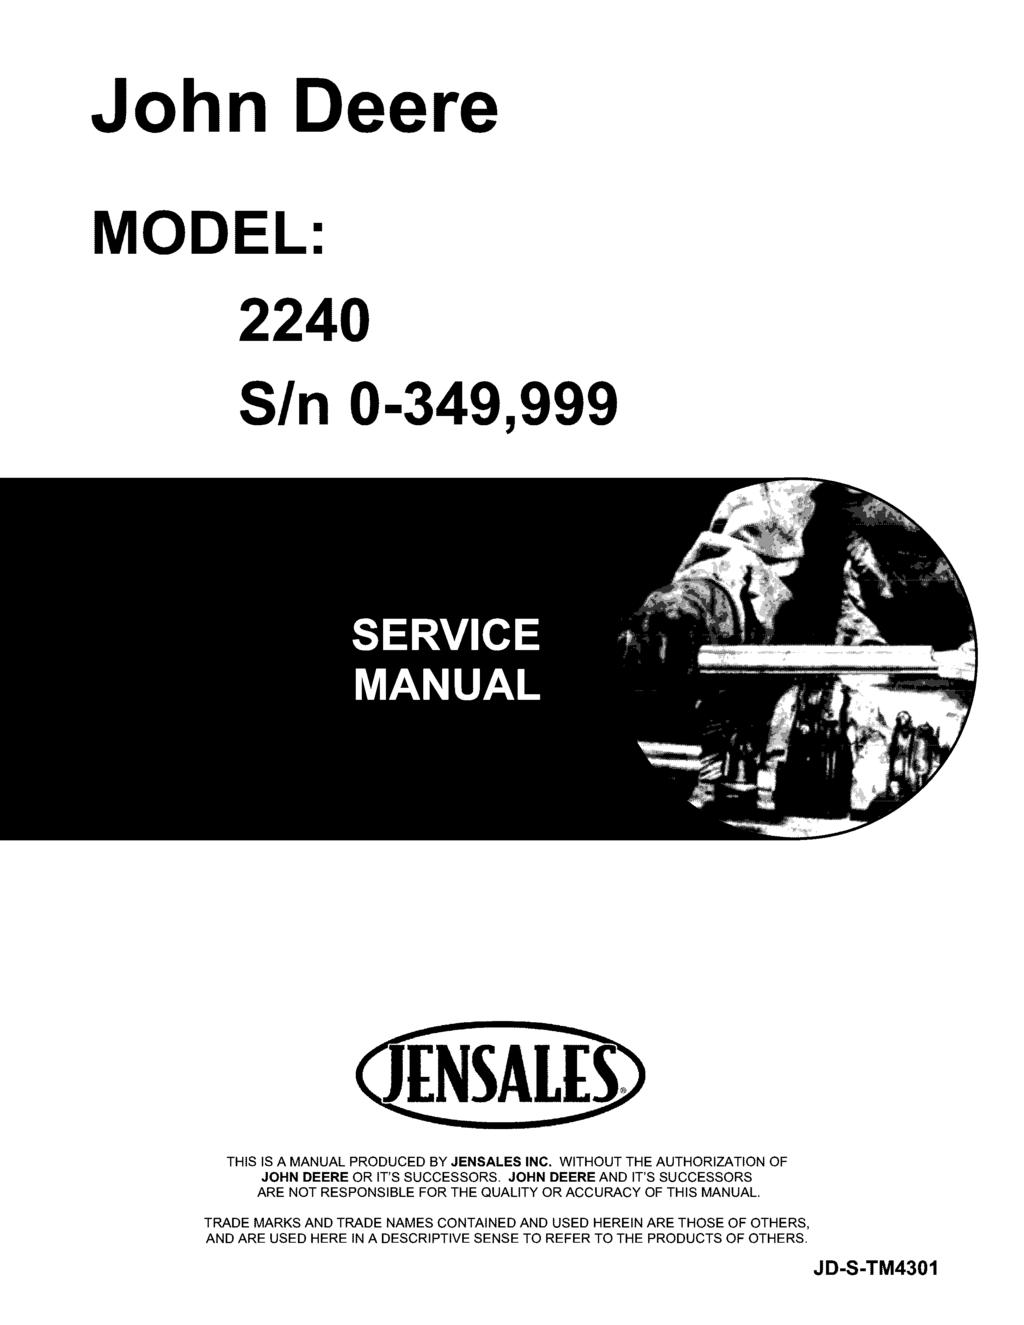 John Deere MODEL: 2240 SIn 0-349,999 THIS IS A MANUAL PRODUCED BY JENSALES INC. WITHOUT THE AUTHORIZATION OF JOHN DEERE OR IT'S SUCCESSORS.